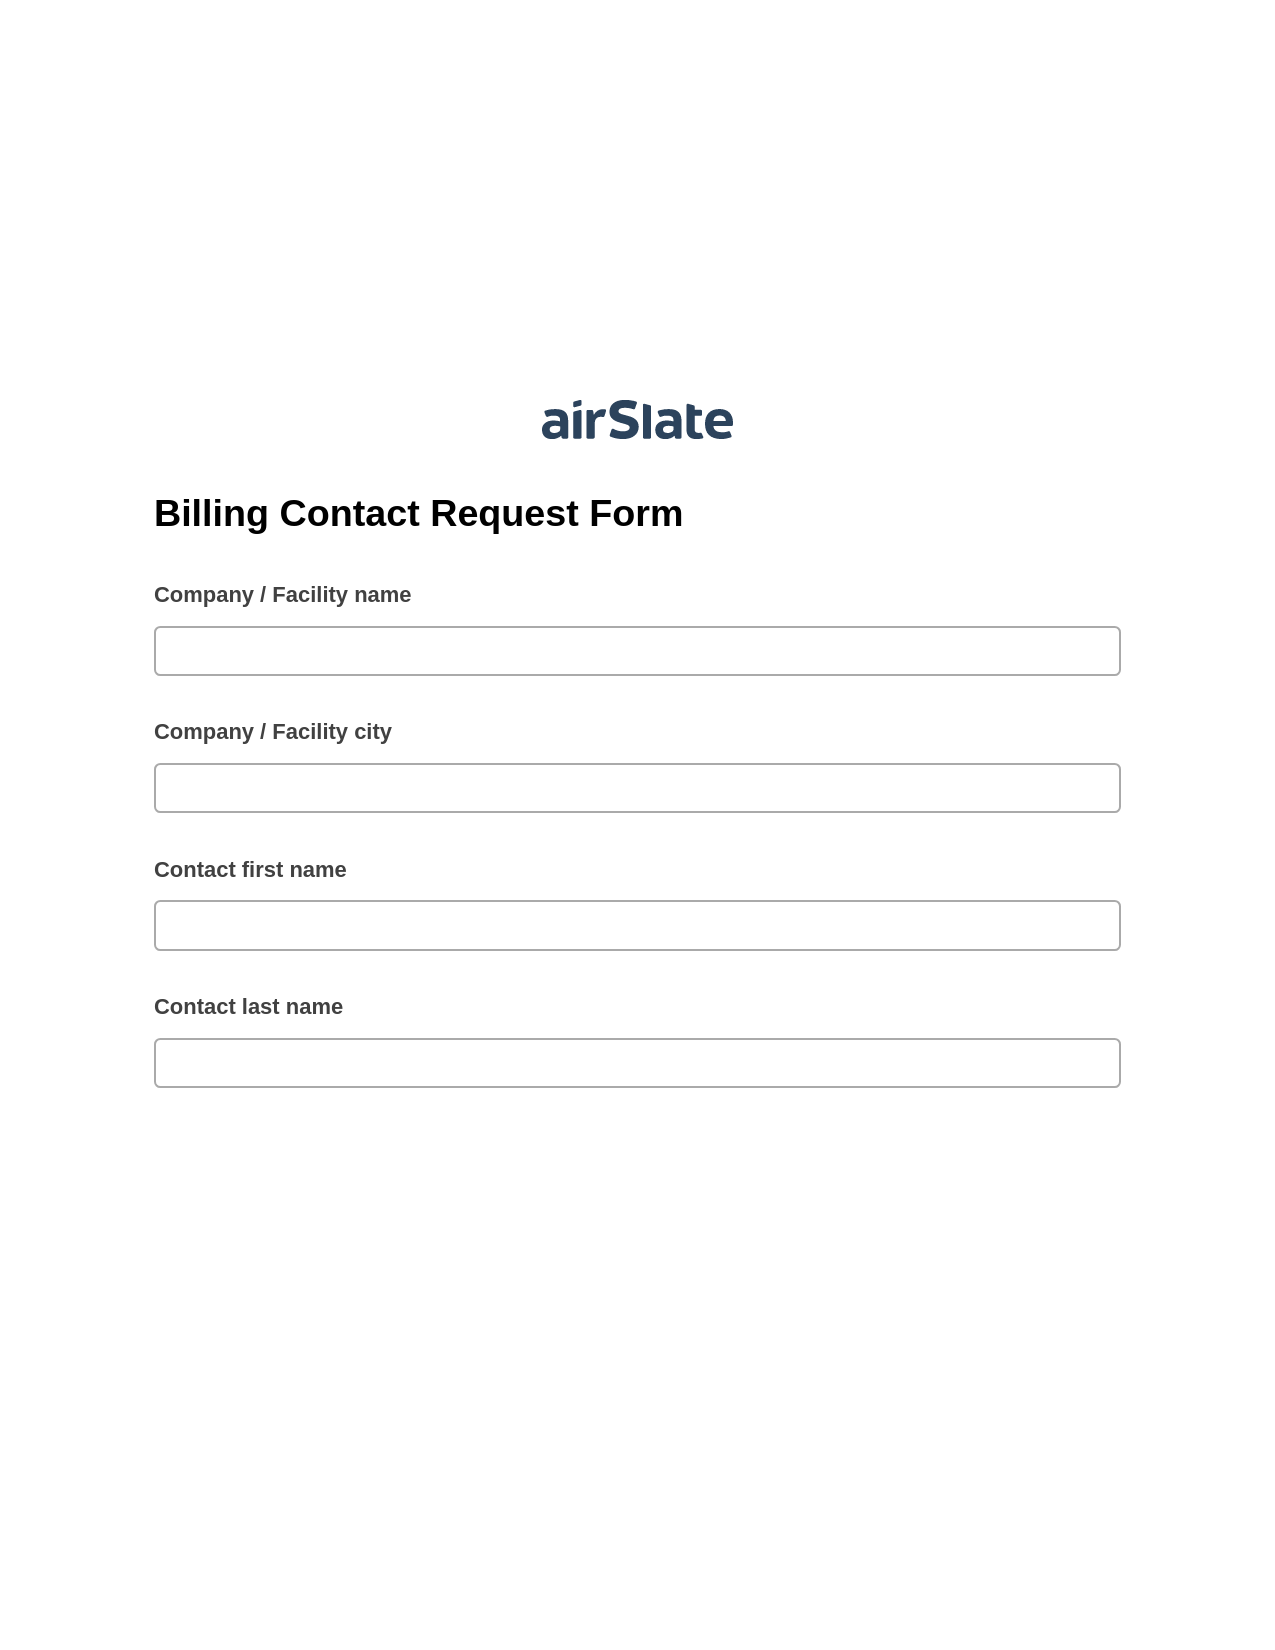 Multirole Billing Contact Request Form Pre-fill from NetSuite Records Bot, Assign Roles to Recipients Bot, Dropbox Bot